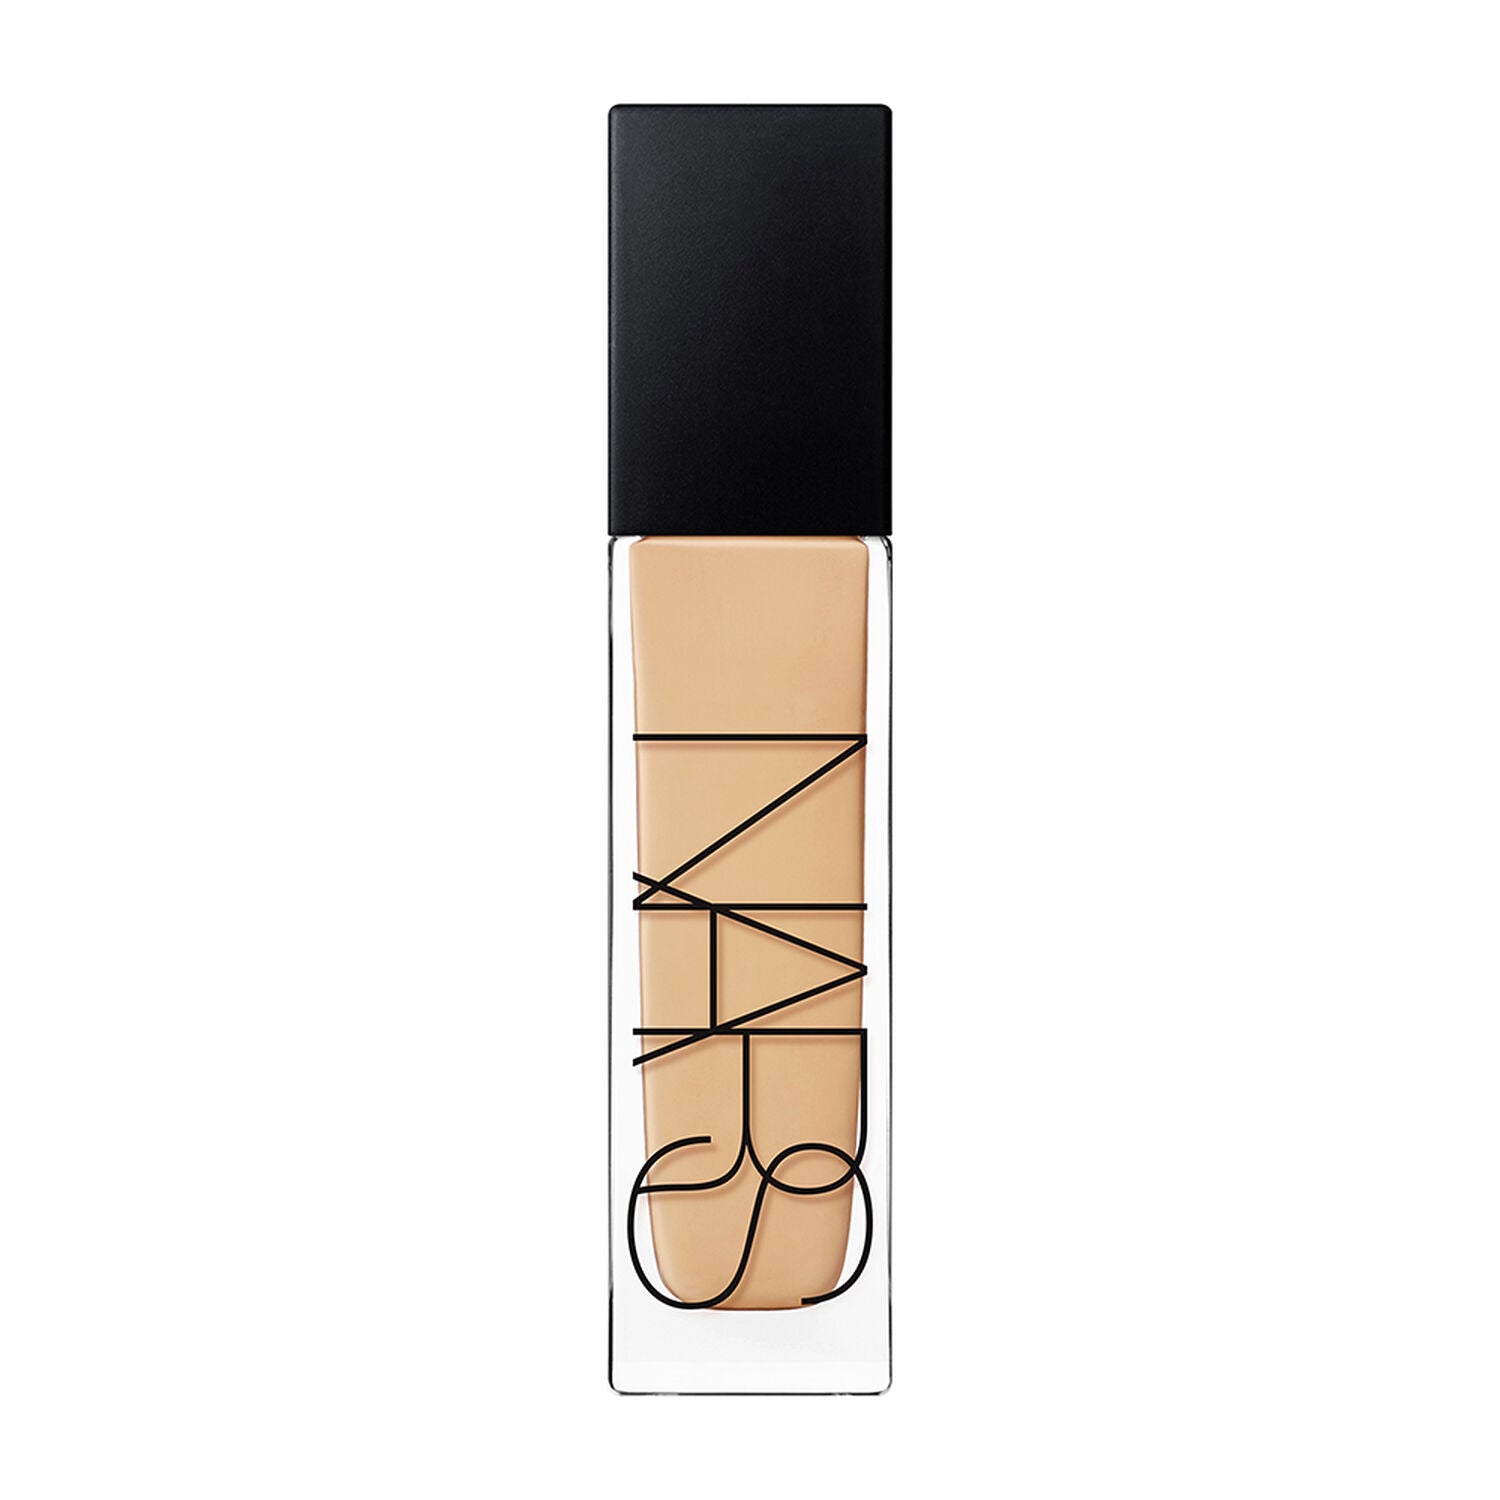 nars-natural-radiant-longwear-foundation-light-5-fiji-carnations-claires-a-moyennes-avec-sous-tons-chauds